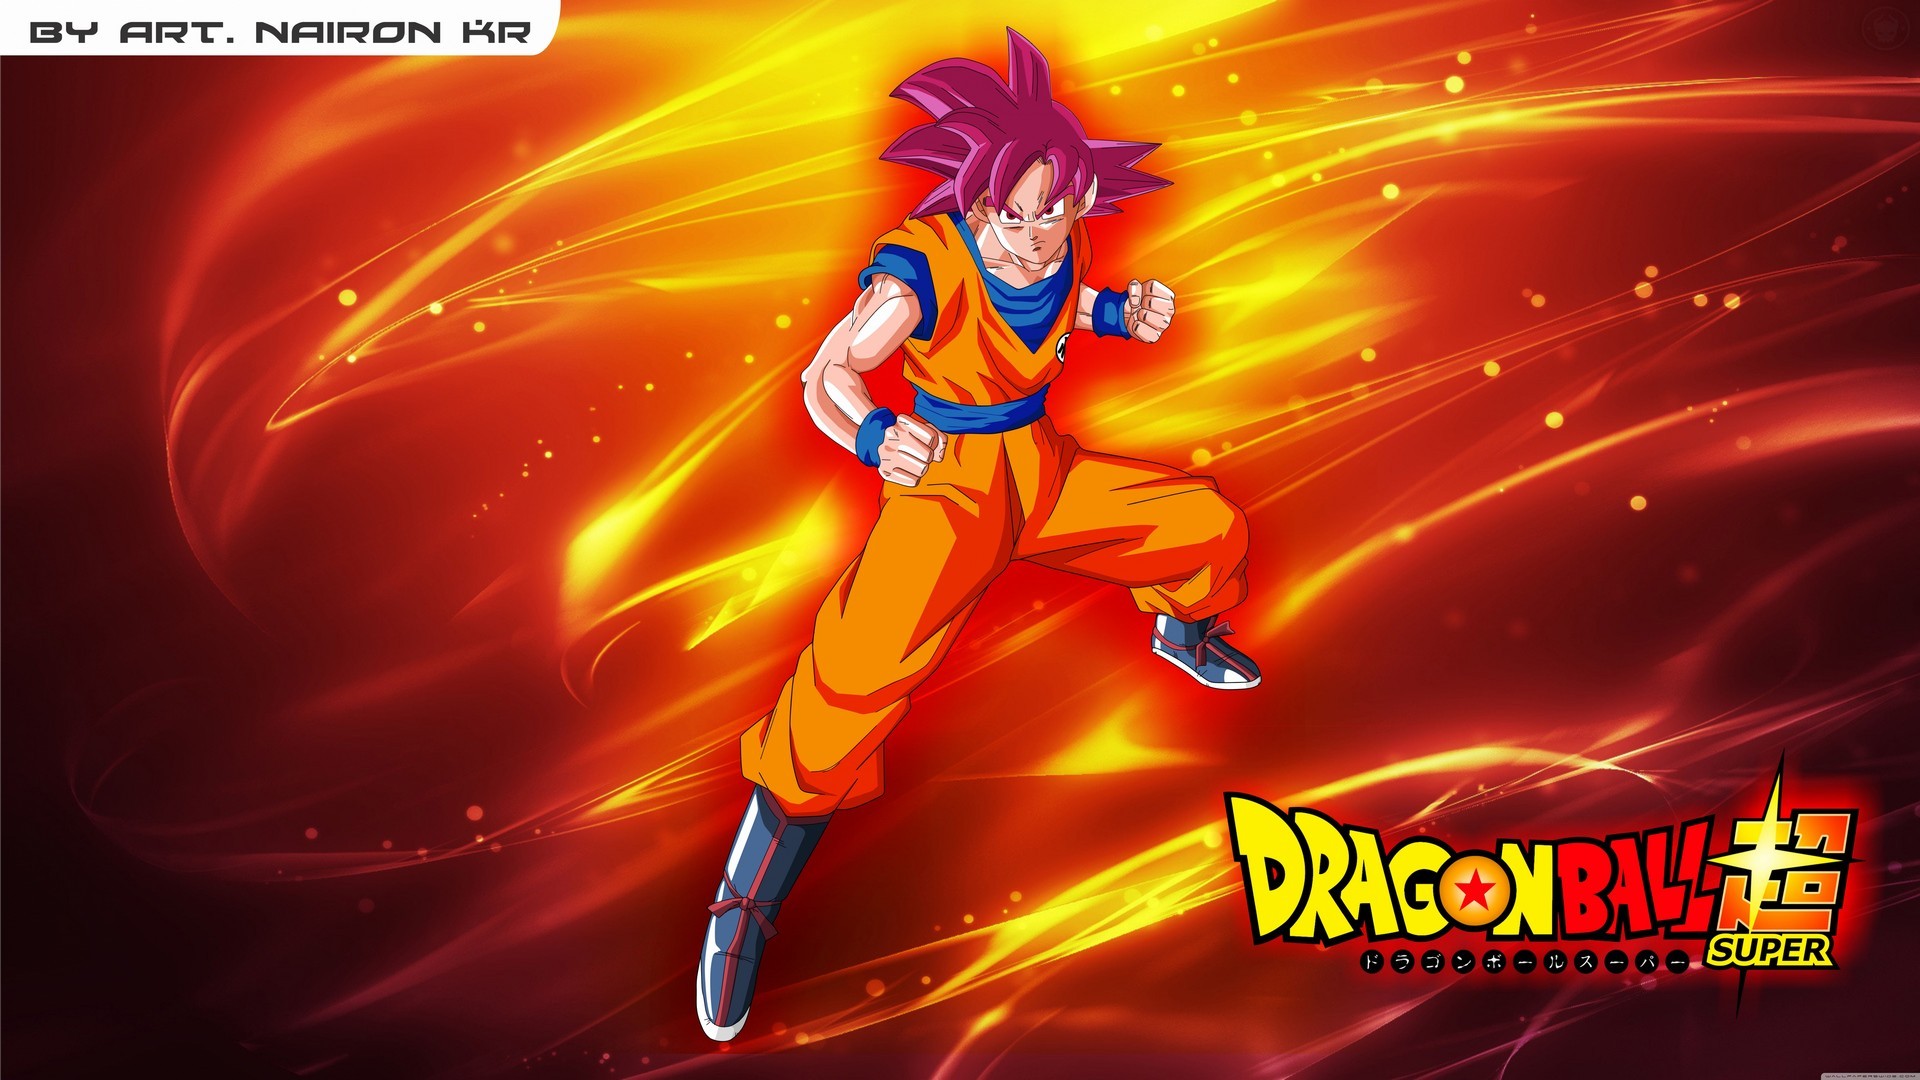 Goku Super Saiyan God HD Wallpaper With Resolution 1920X1080 pixel. You can make this wallpaper for your Desktop Computer Backgrounds, Mac Wallpapers, Android Lock screen or iPhone Screensavers